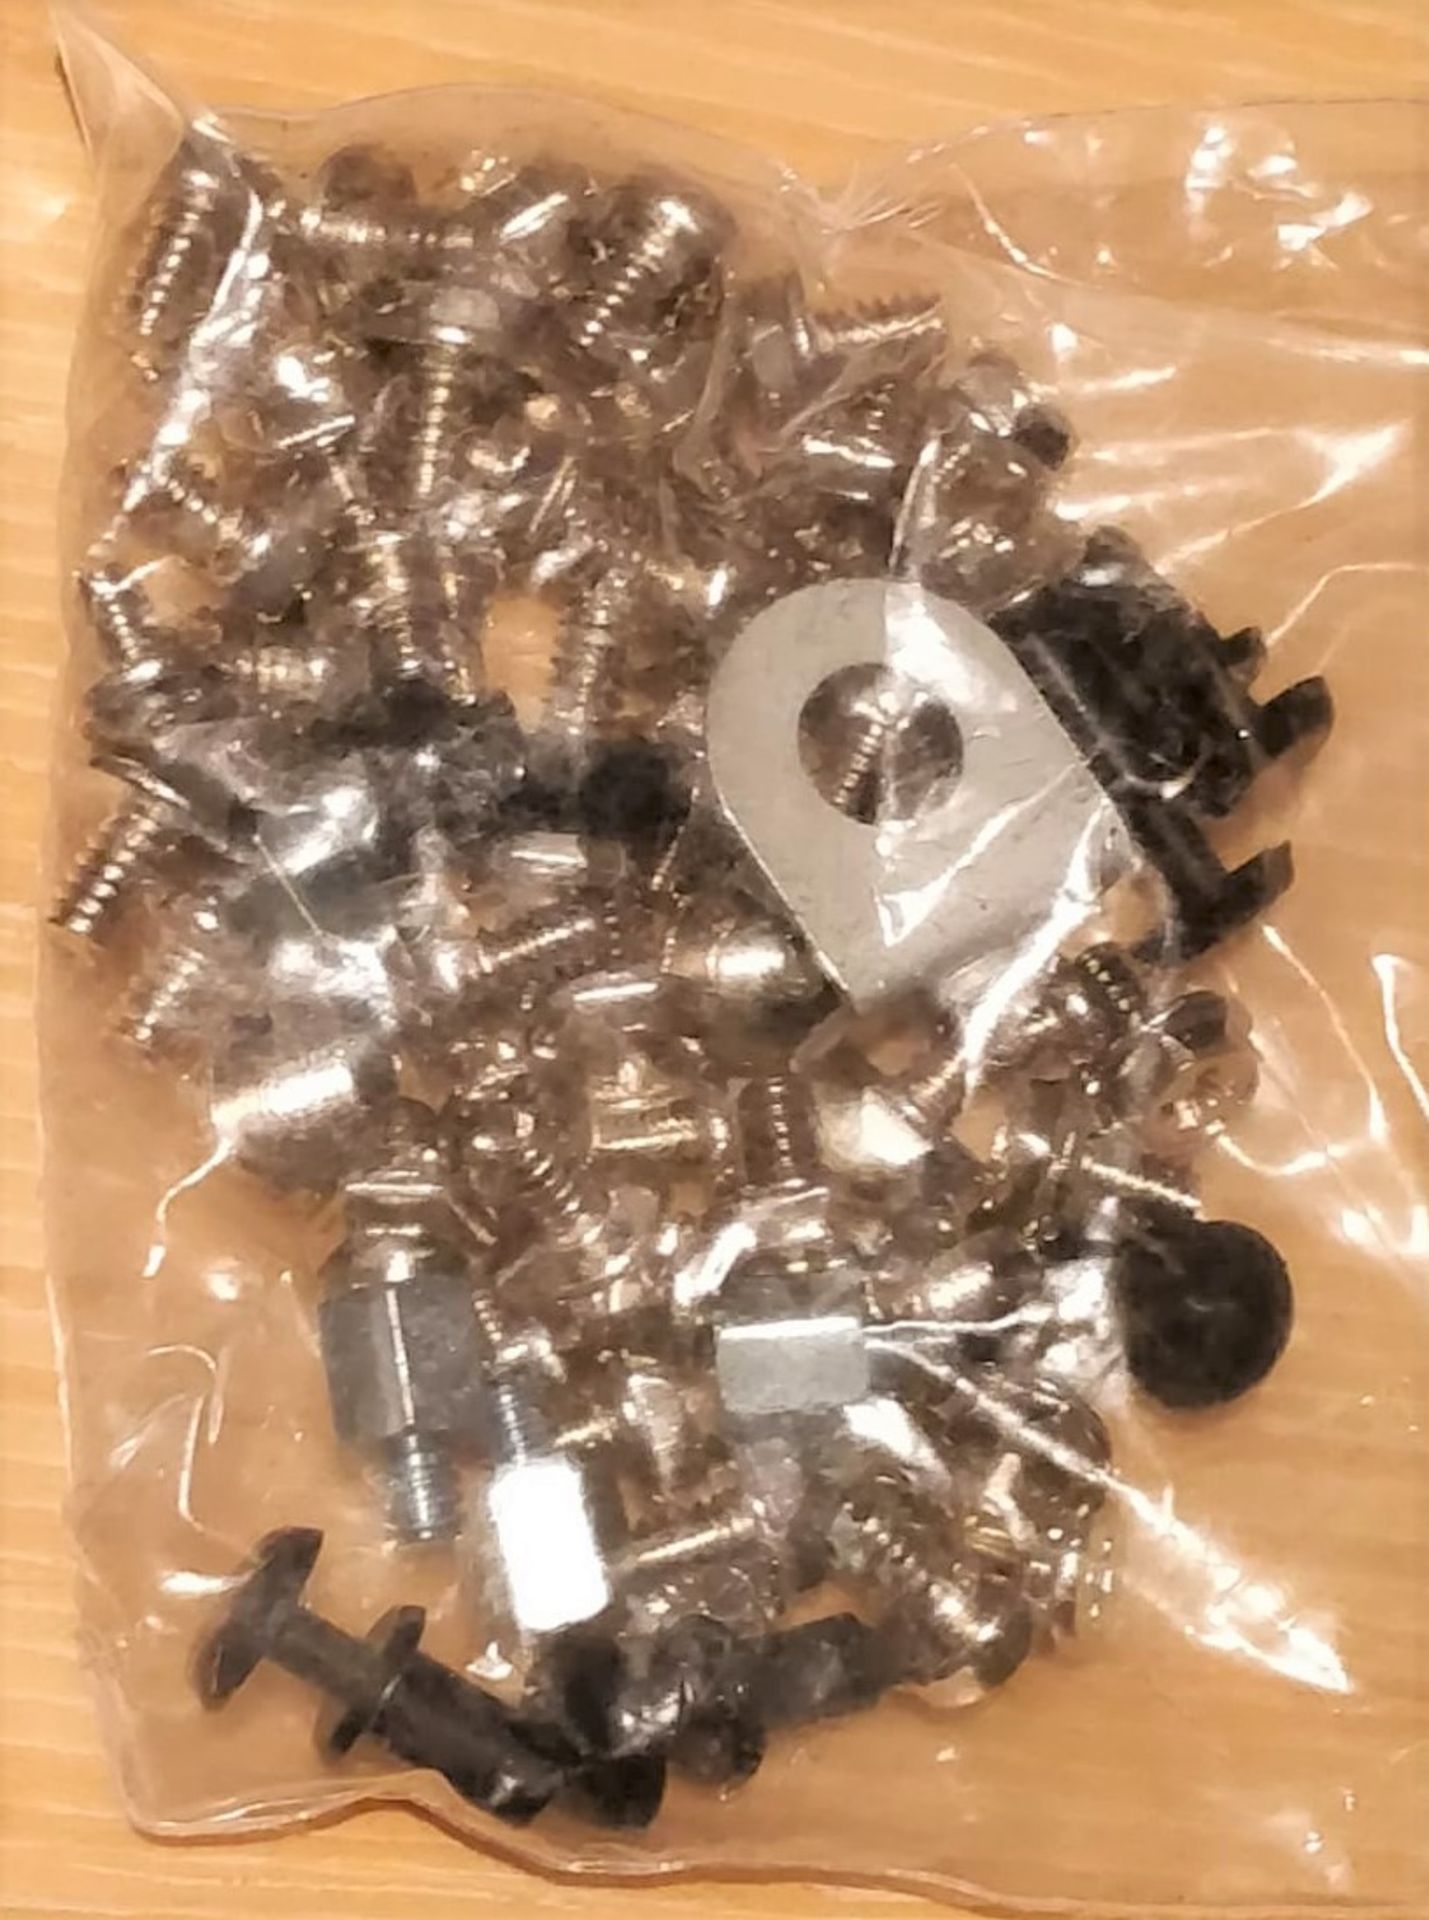 80 x PC Builders Screw Sets - Screw Sets For PC Building With Various Screws in Each Pack - Ref: